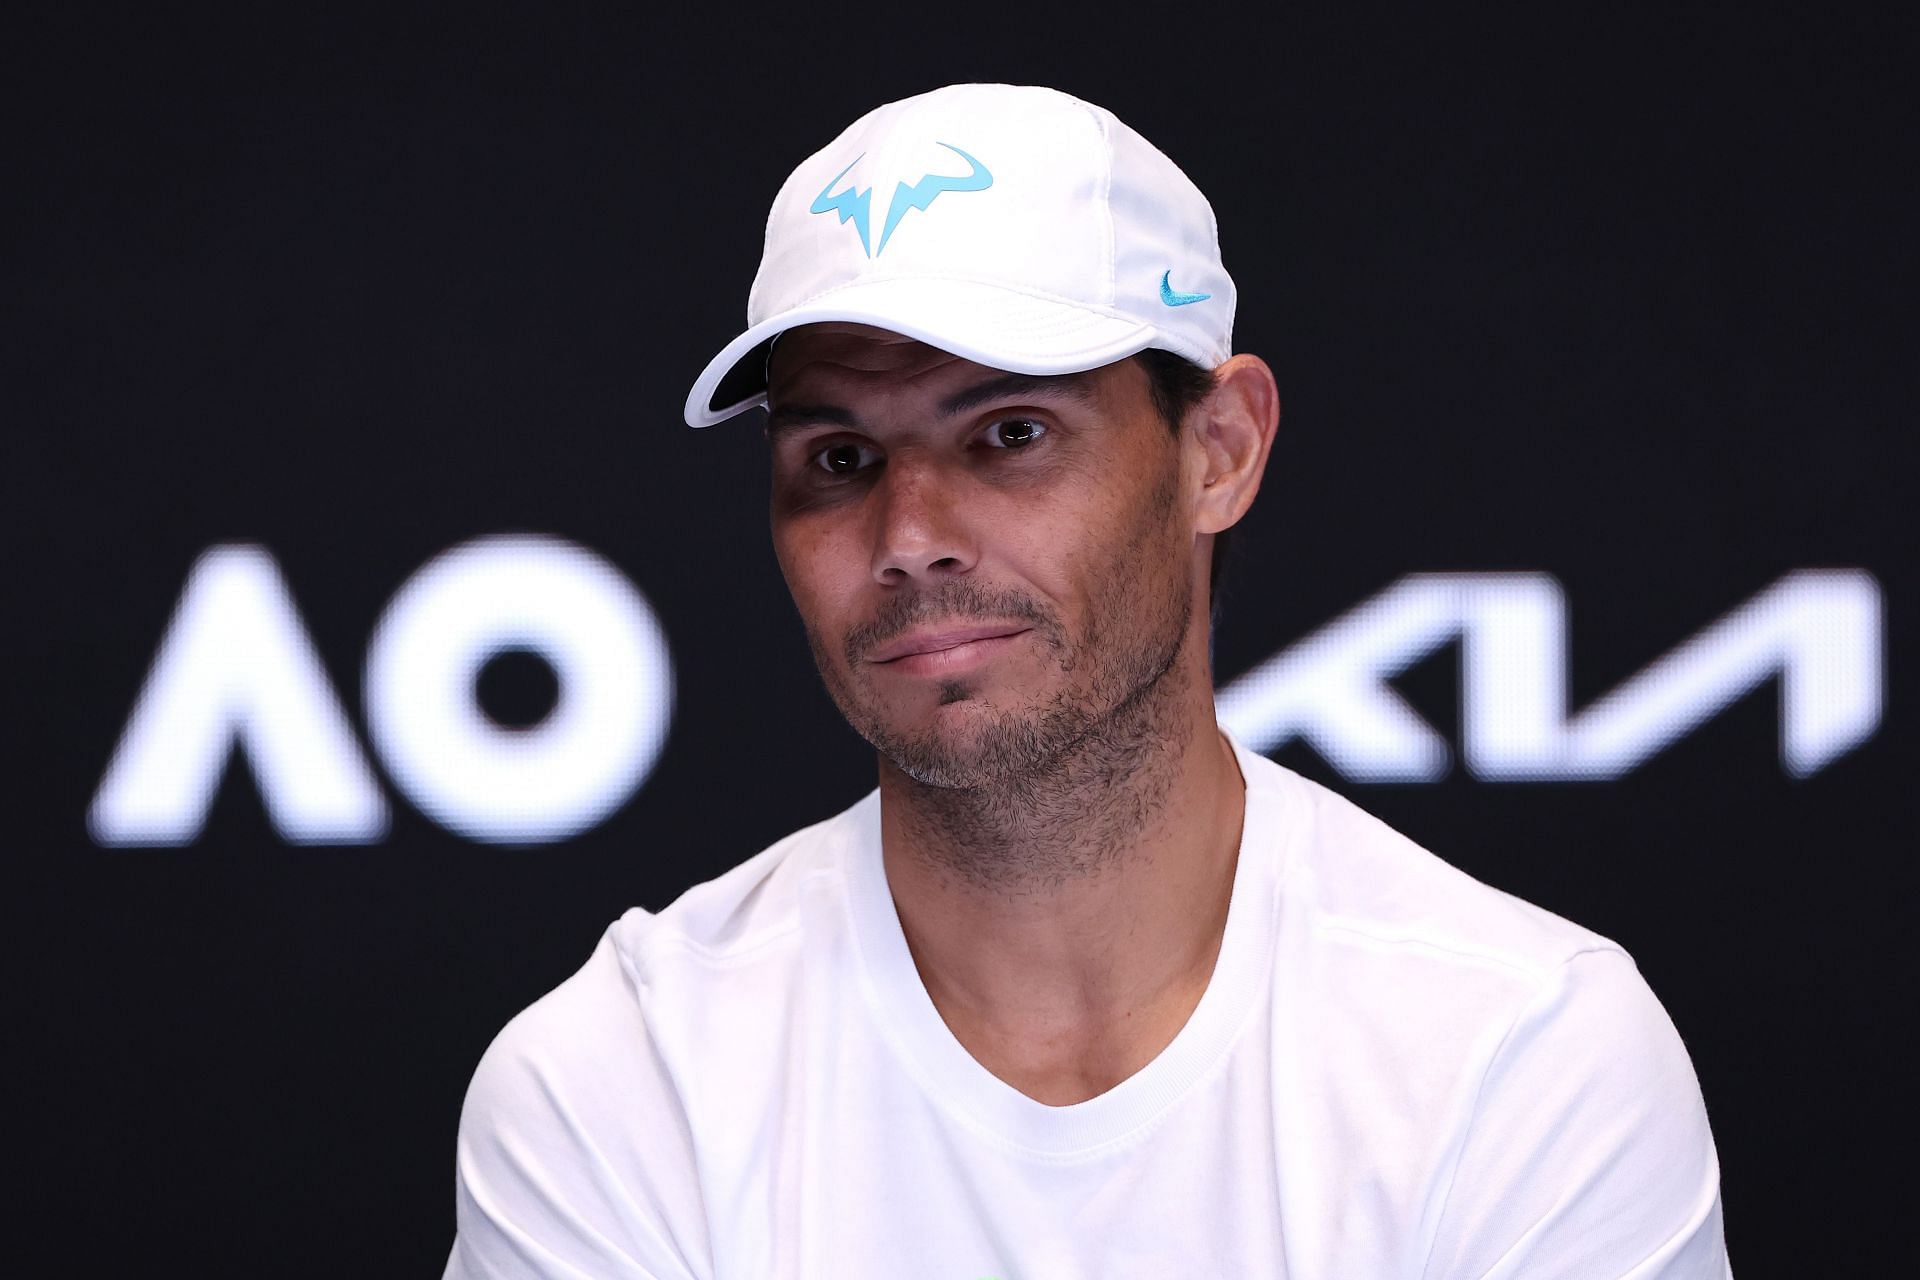 The former World No. 1 sustained a hip injury at the 2023 Australian Open